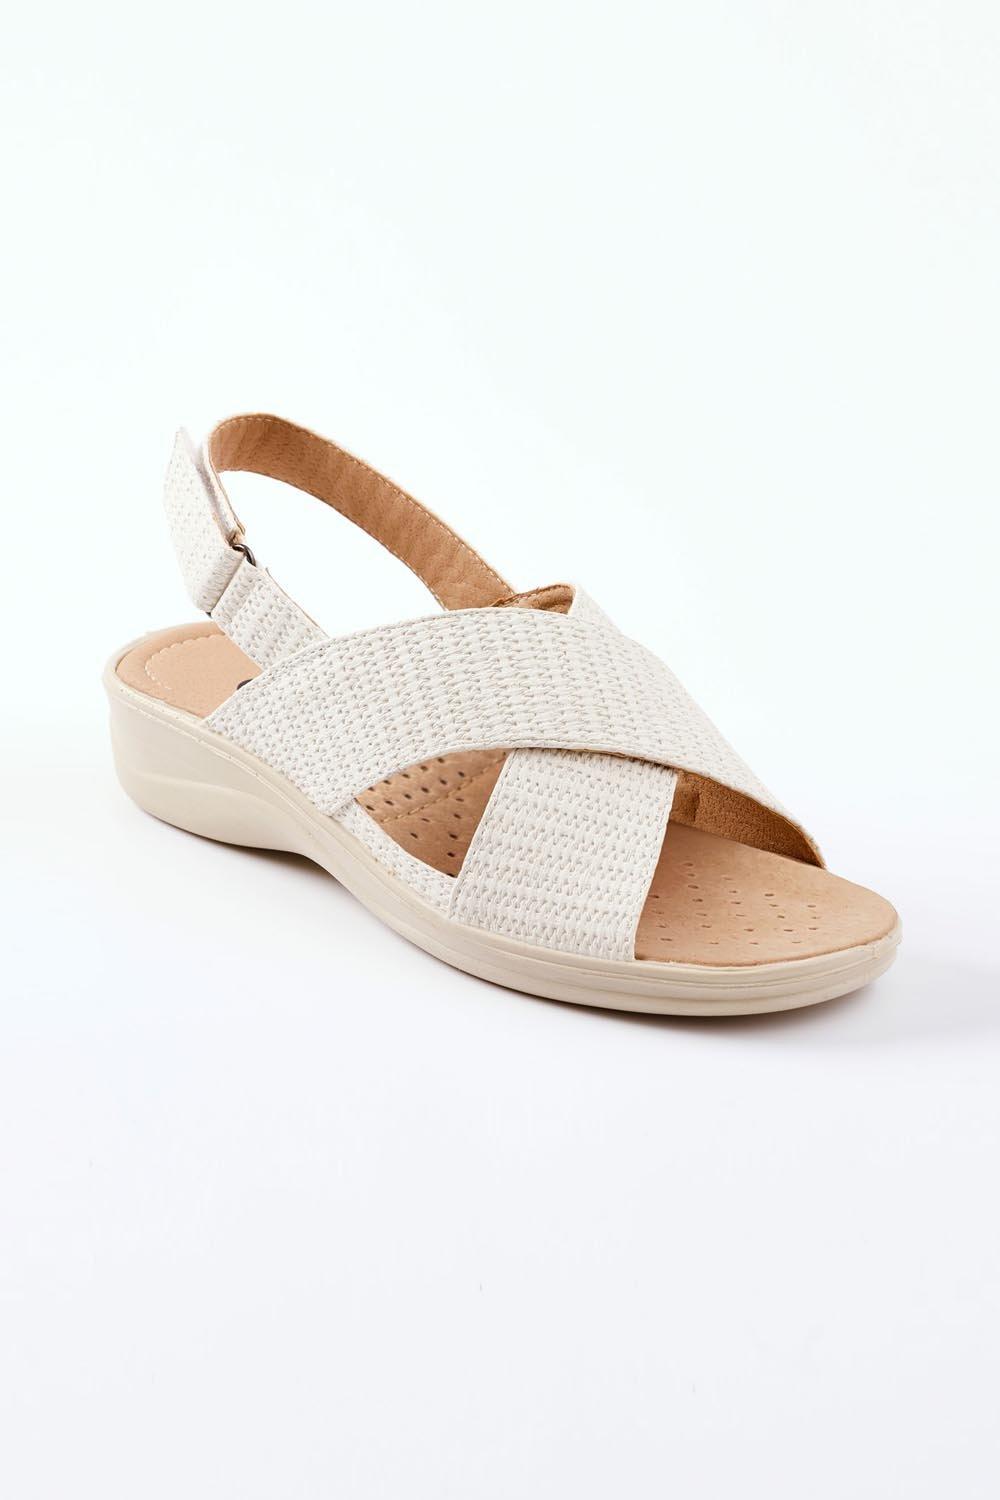 Share more than 251 cotton strap sandals latest